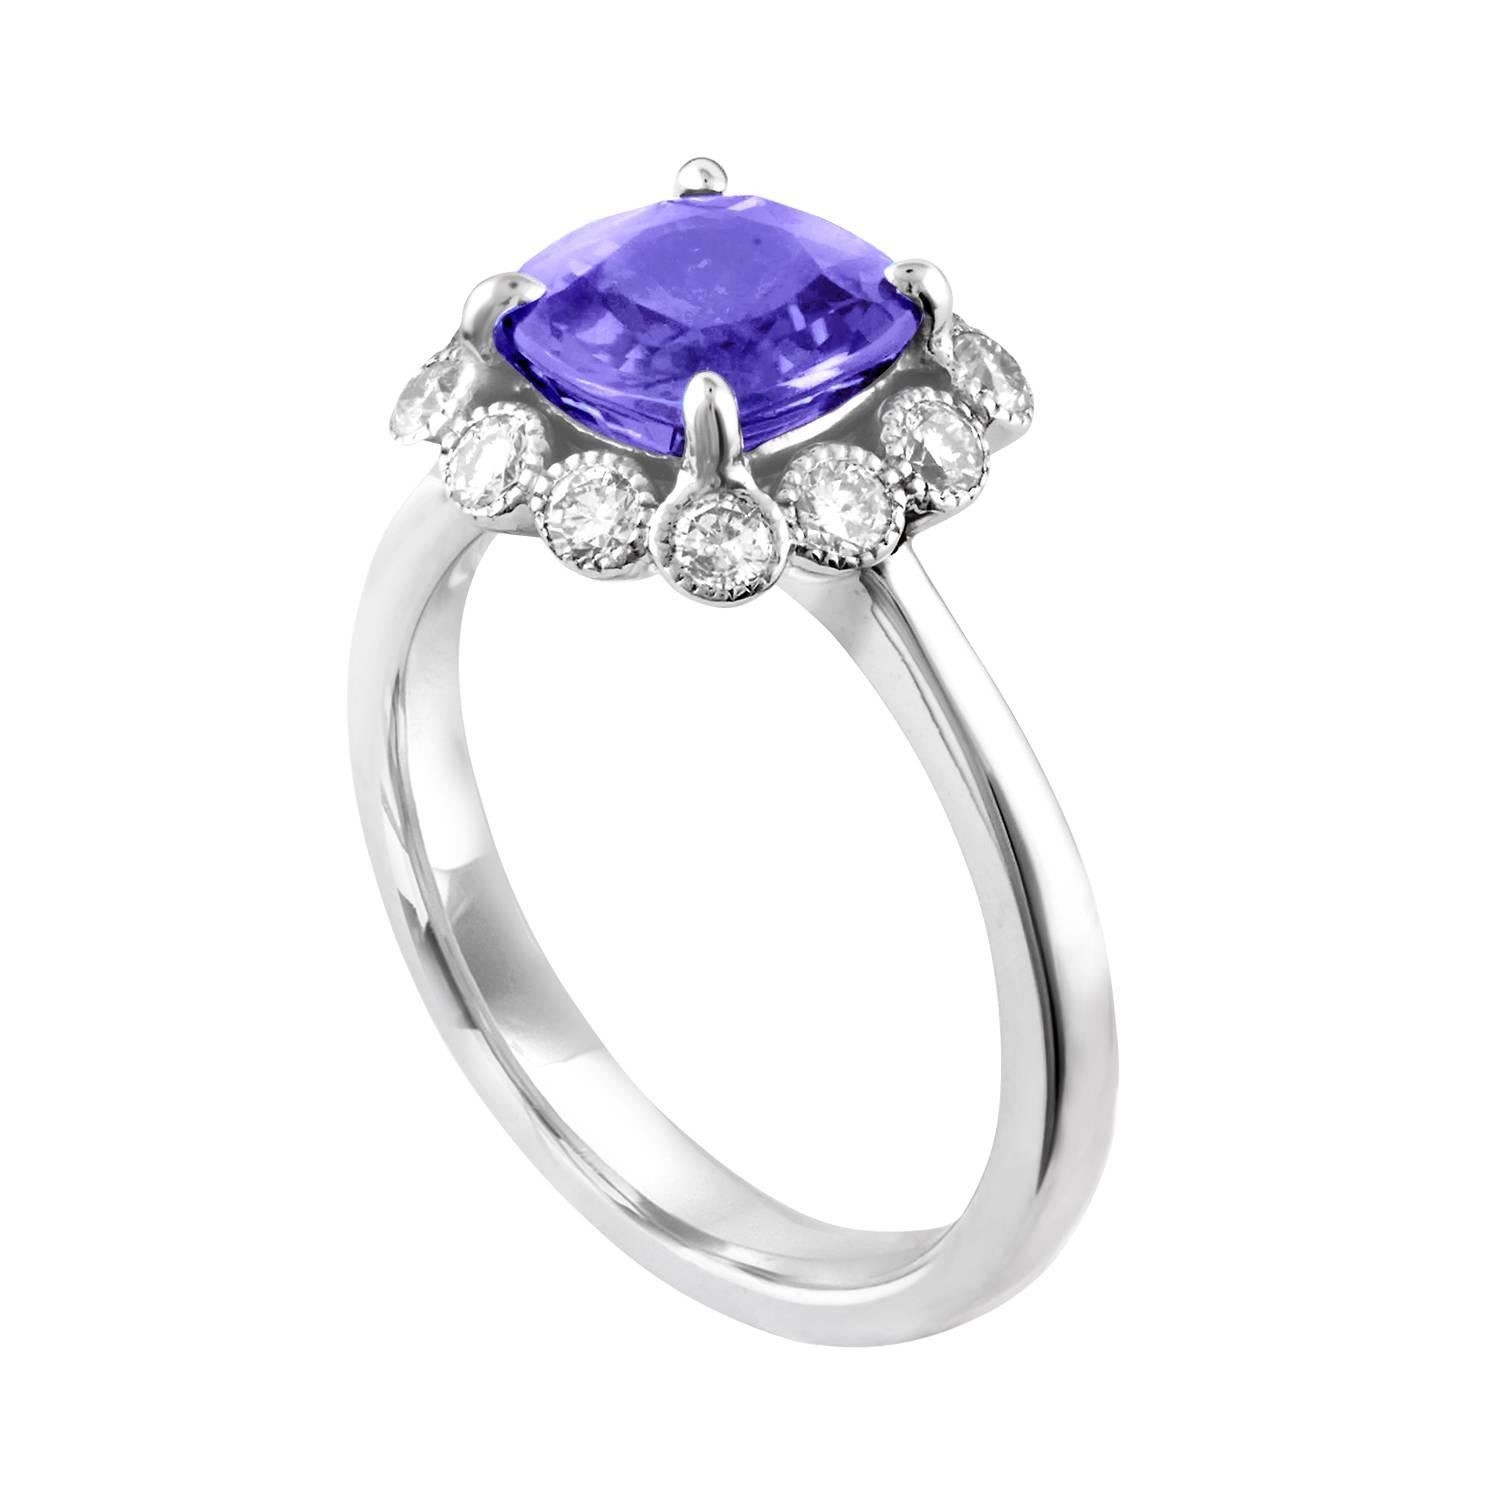 Beautiful Halo Ring
The ring is 14K White Gold
The Center Stone is a Violetish Blue Sapphire 2.59 Carats NO HEAT
The Sapphire is AGL Certified
There are 0.51 Carats in Diamonds G SI
The ring is a size 6.5, sizable
The ring weighs 5.0 grams